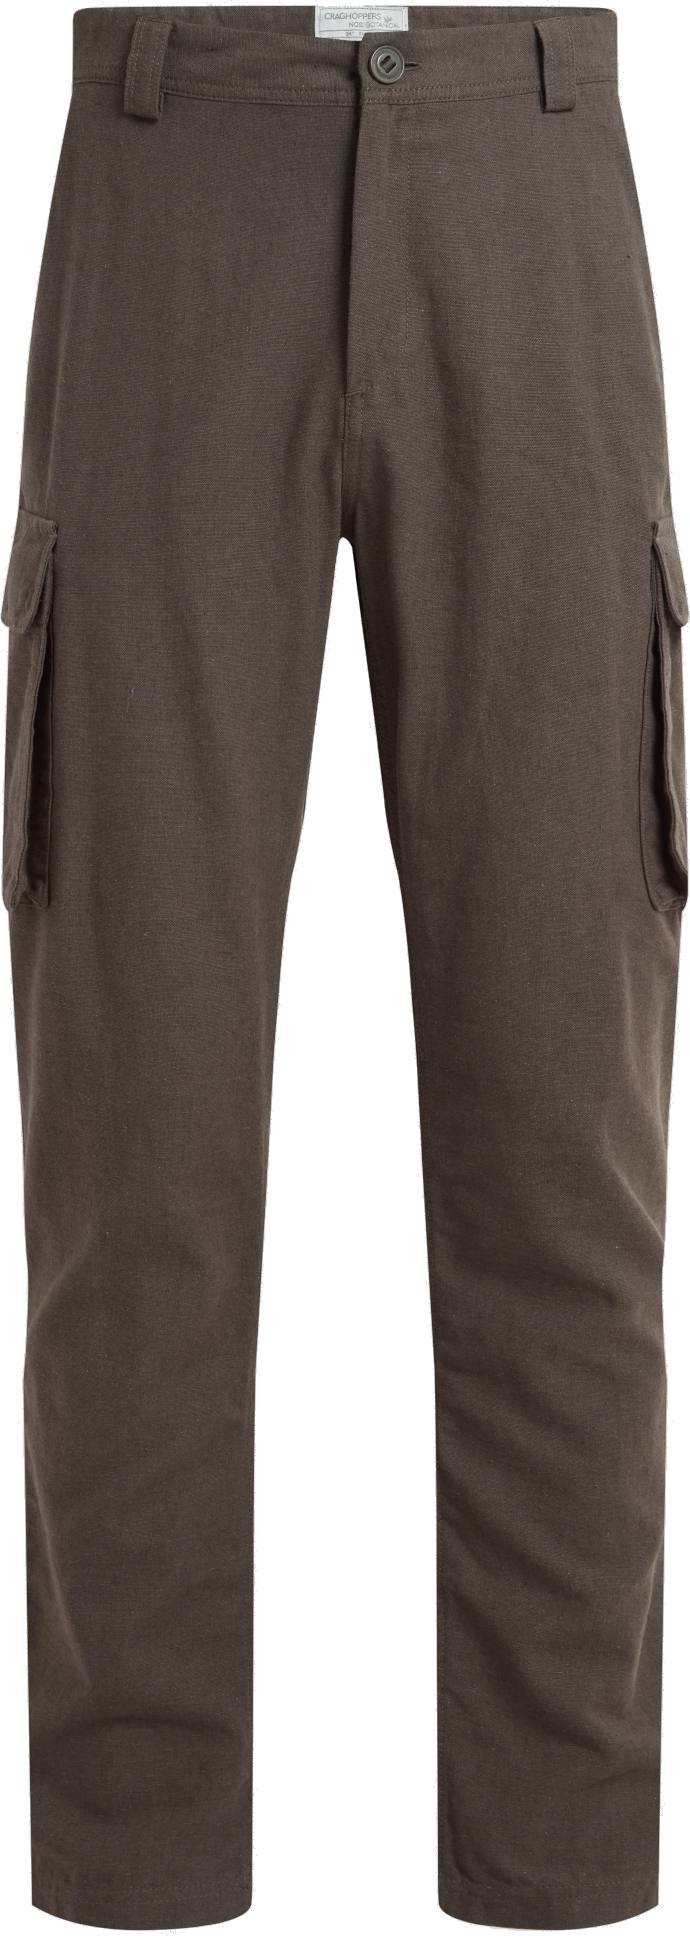 Craghoppers Men’s Howle Trousers